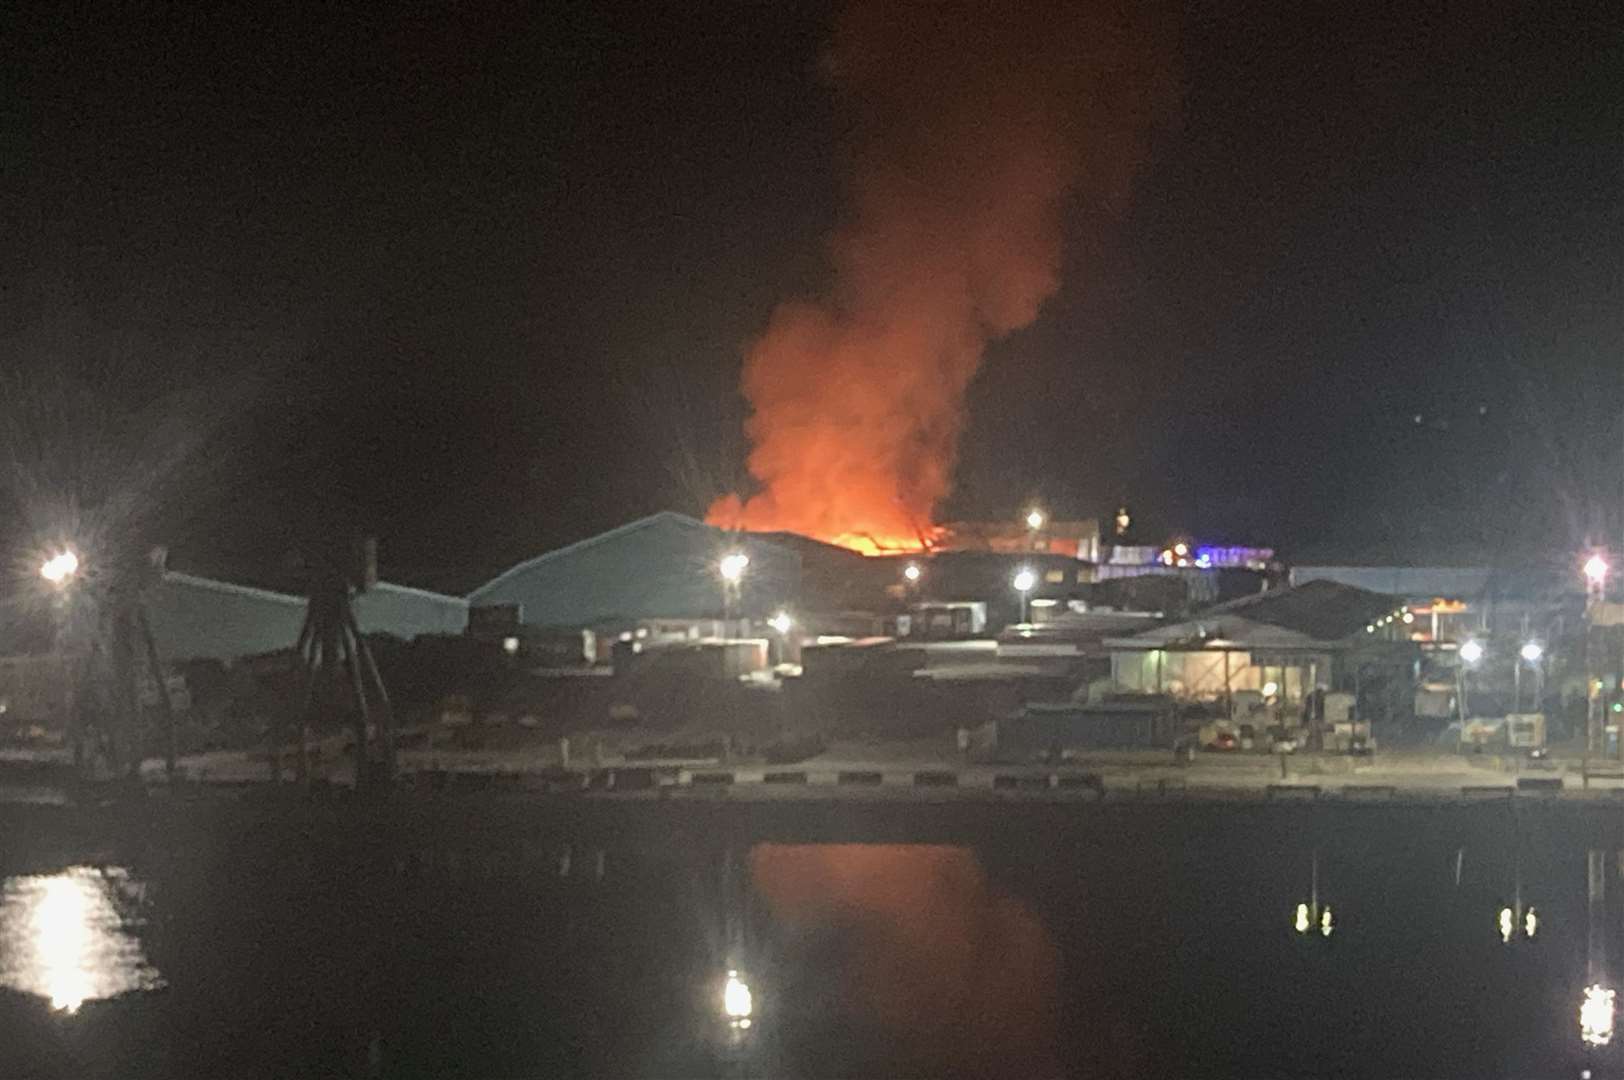 Flames can be seen pouring from the building at Chatham Docks. Picture: Duncan Mackie